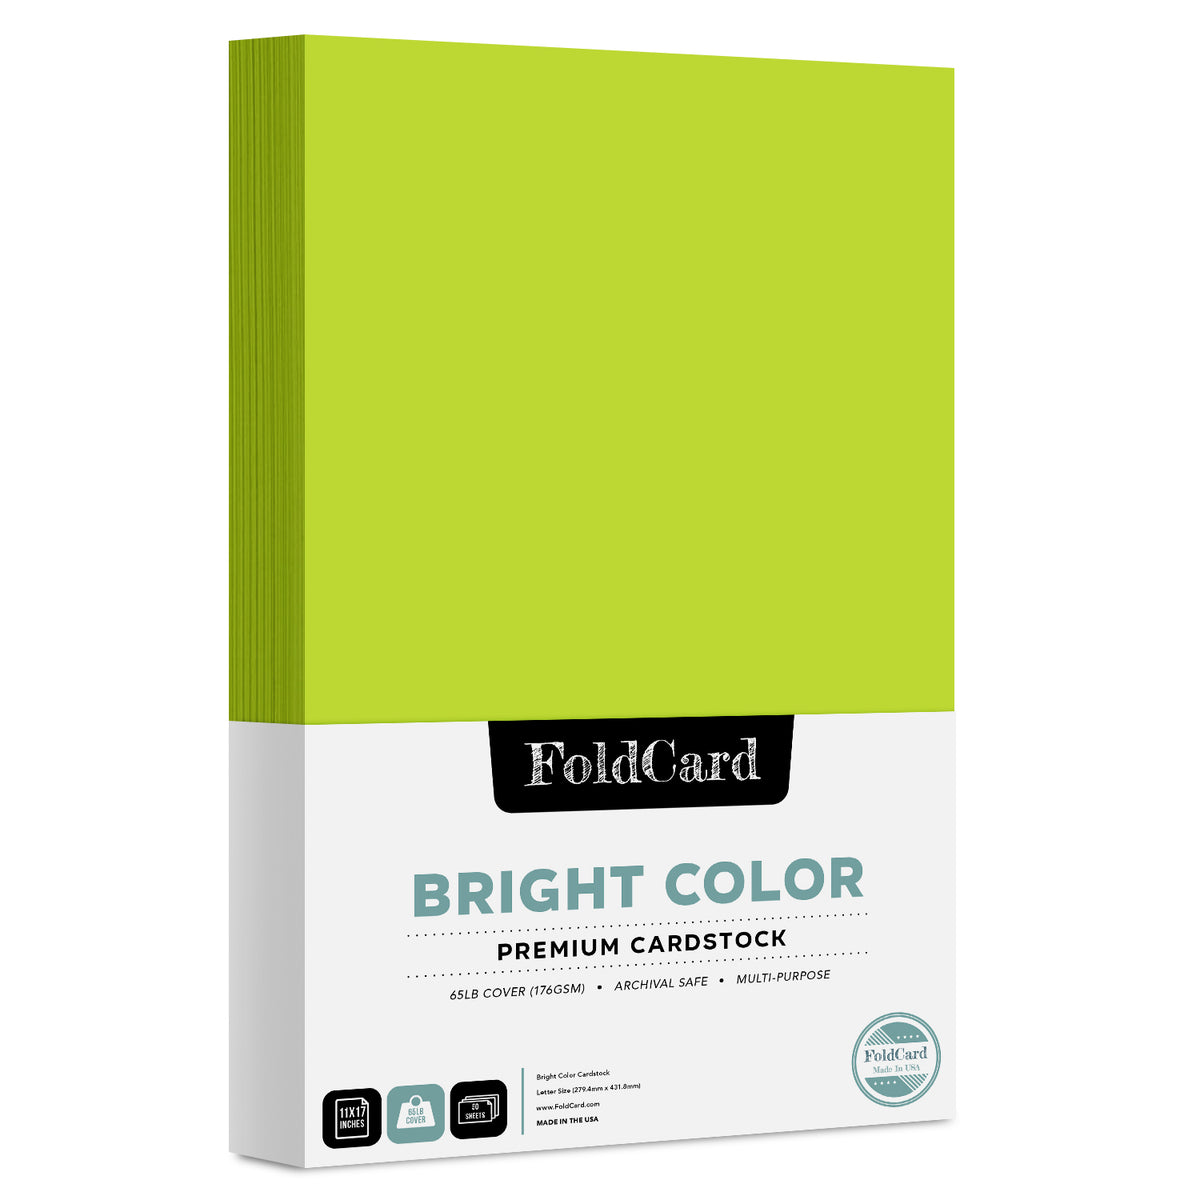 Premium Quality Bright Color Cardstock: 11 x 17 - 50 Sheets of 65lb Cover Weight